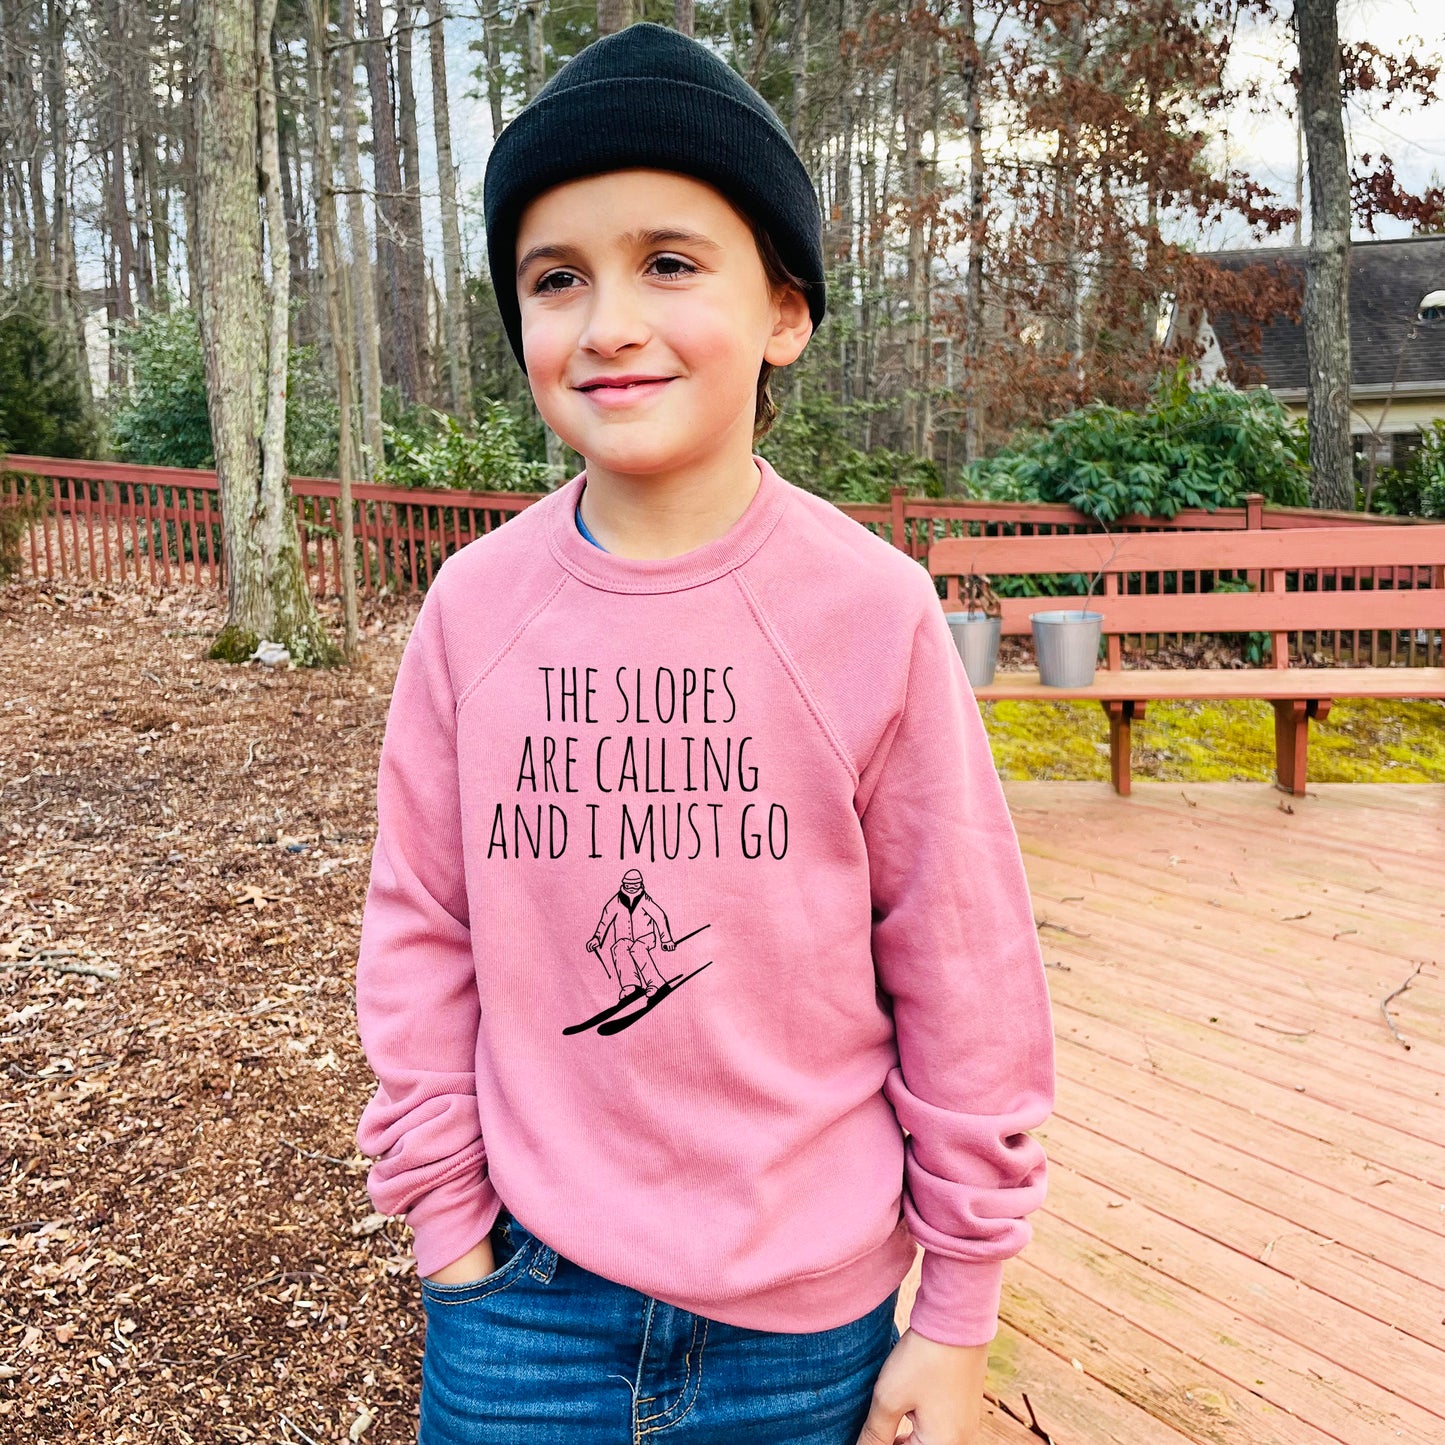 Slopes Are Calling And I Must Go (Skiing) - Kid's Sweatshirt - Heather Gray or Mauve